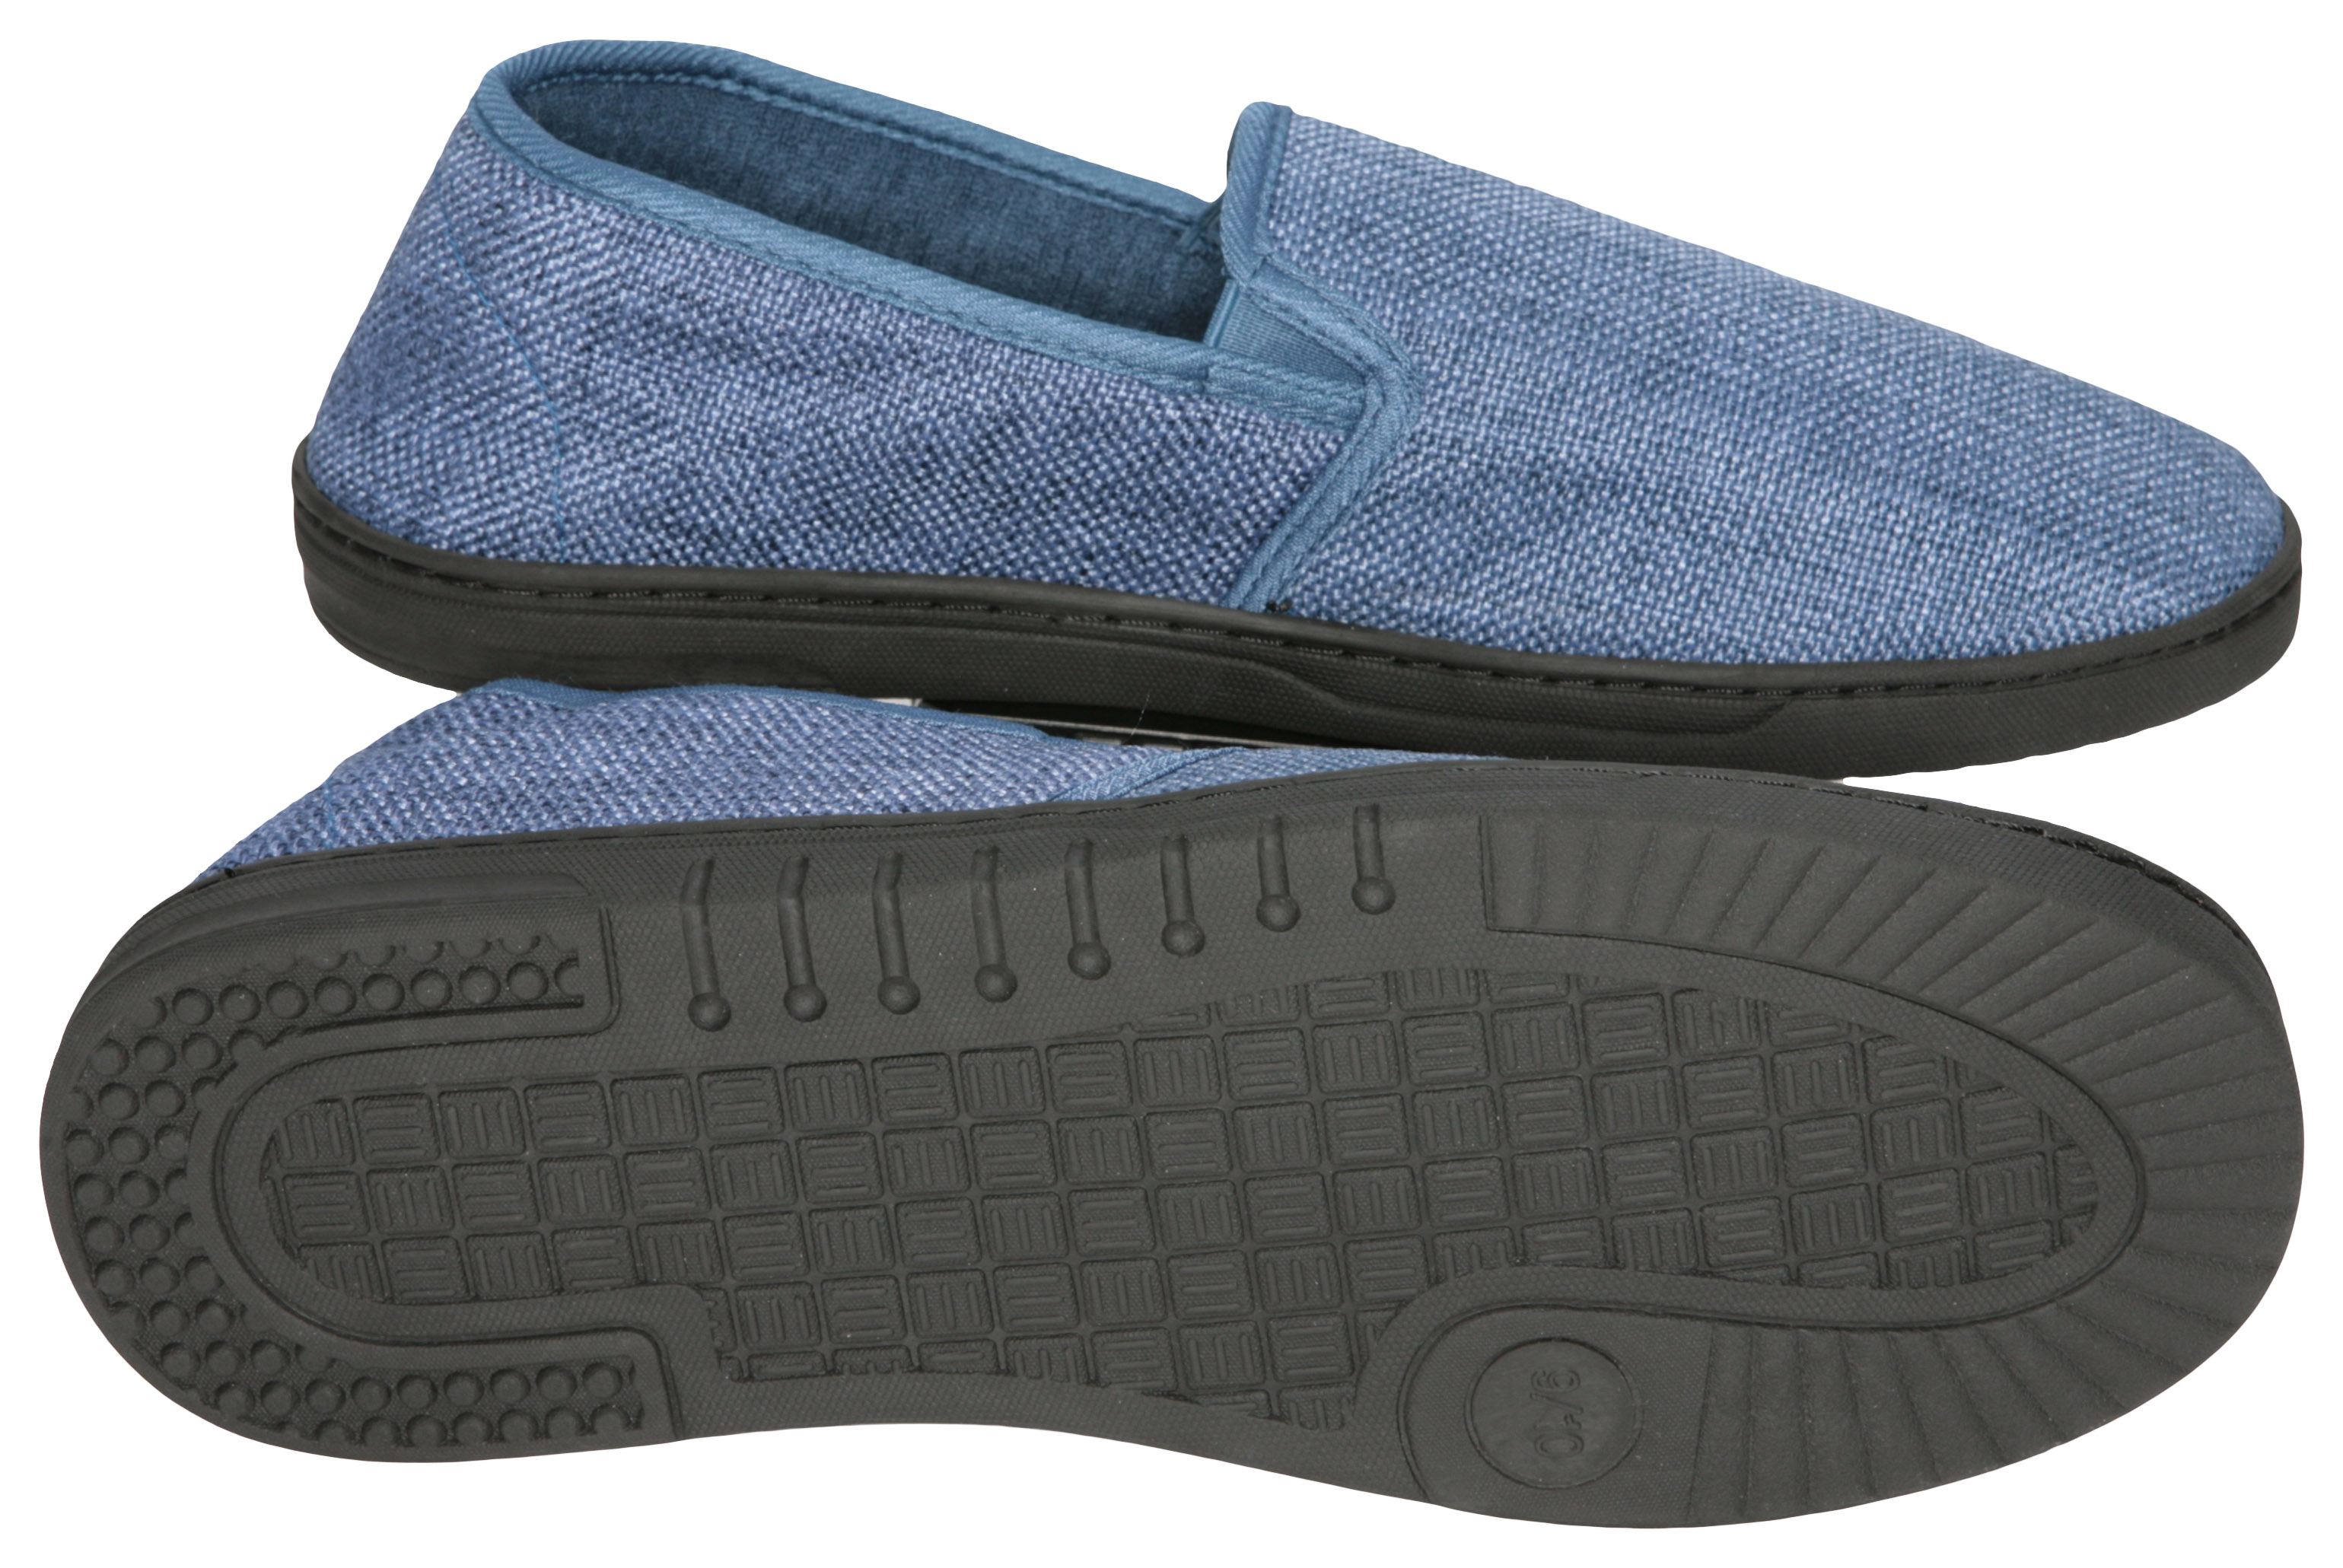 Deluxe Comfort Men's Memory Foam Slipper, Size 9-10 – Soft Linen 120D SBR Insole and Rubber Outsole – Pure Suede Shoes – Non-Marking Sole – Men's Slippers, Blue - image 5 of 5